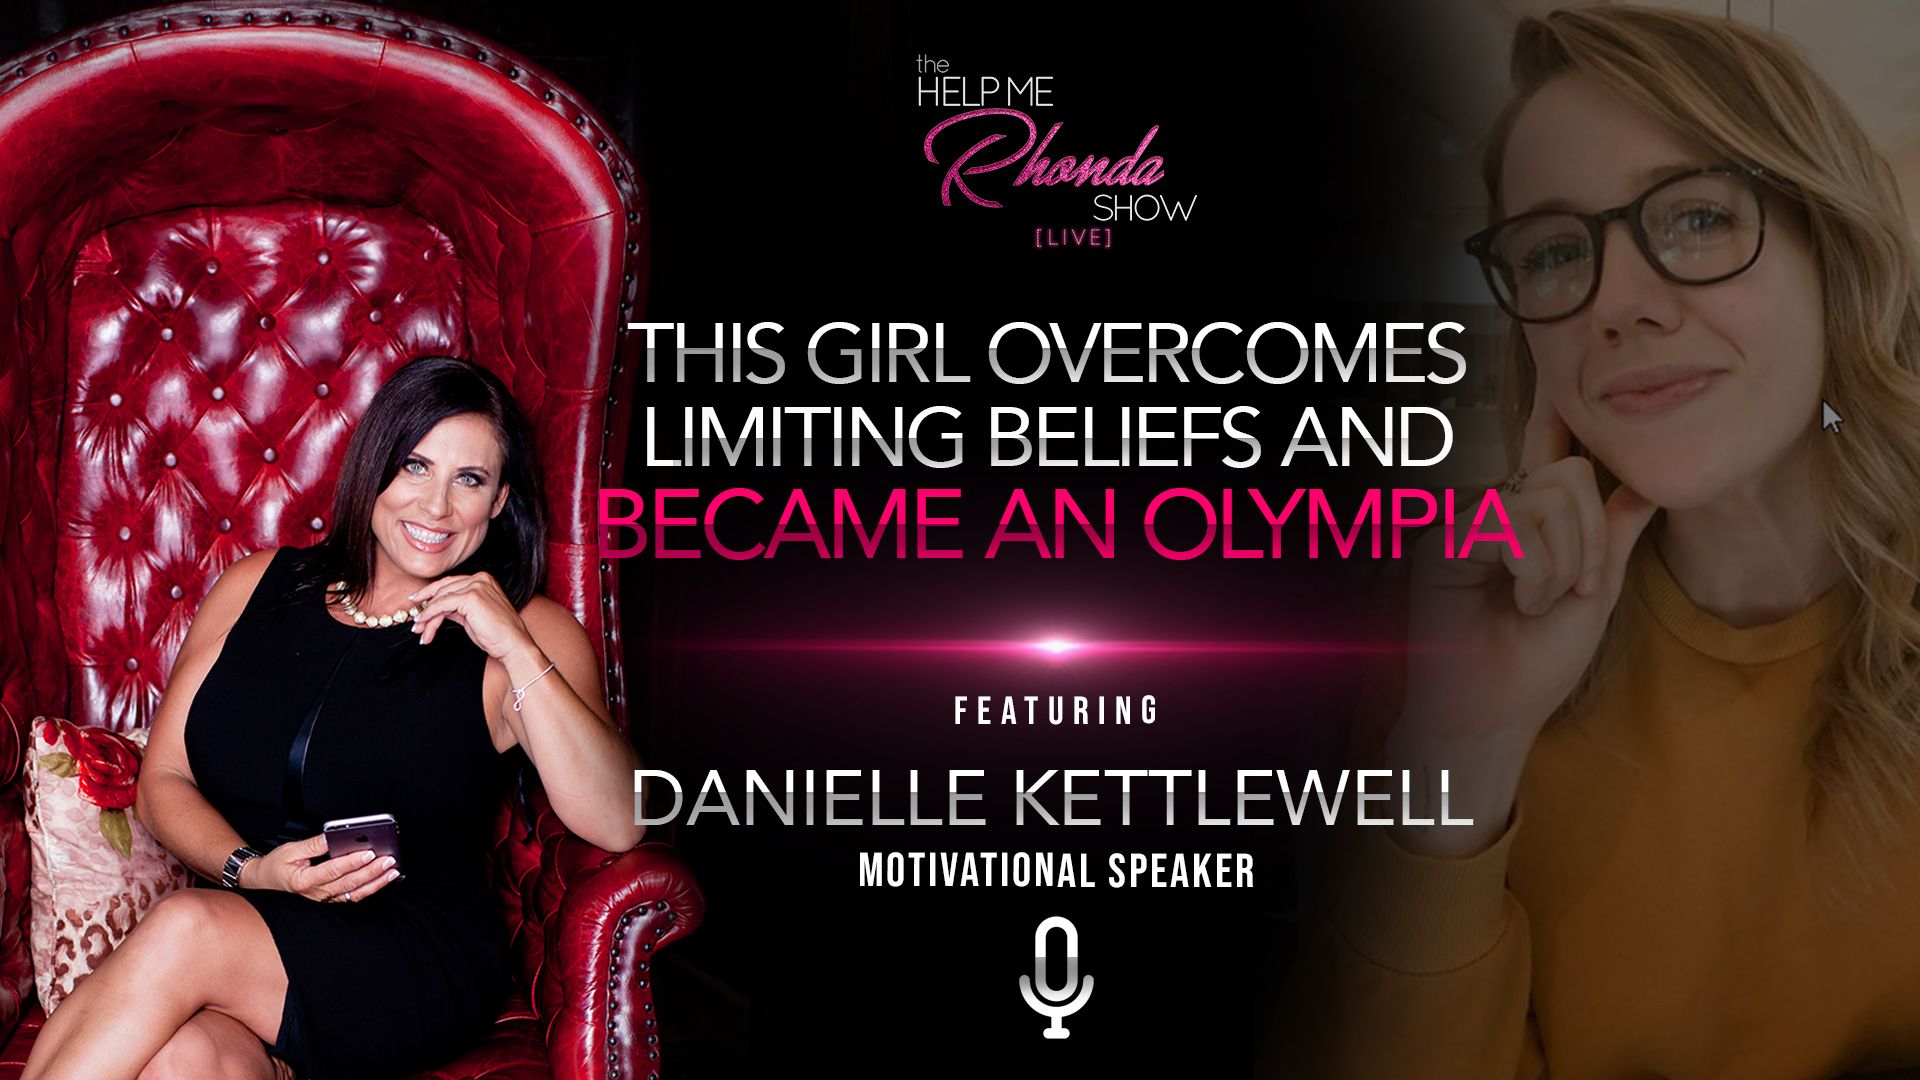 Danielle Kettlewell - This Girl Overcame Limiting Beliefs And Became An Olympian